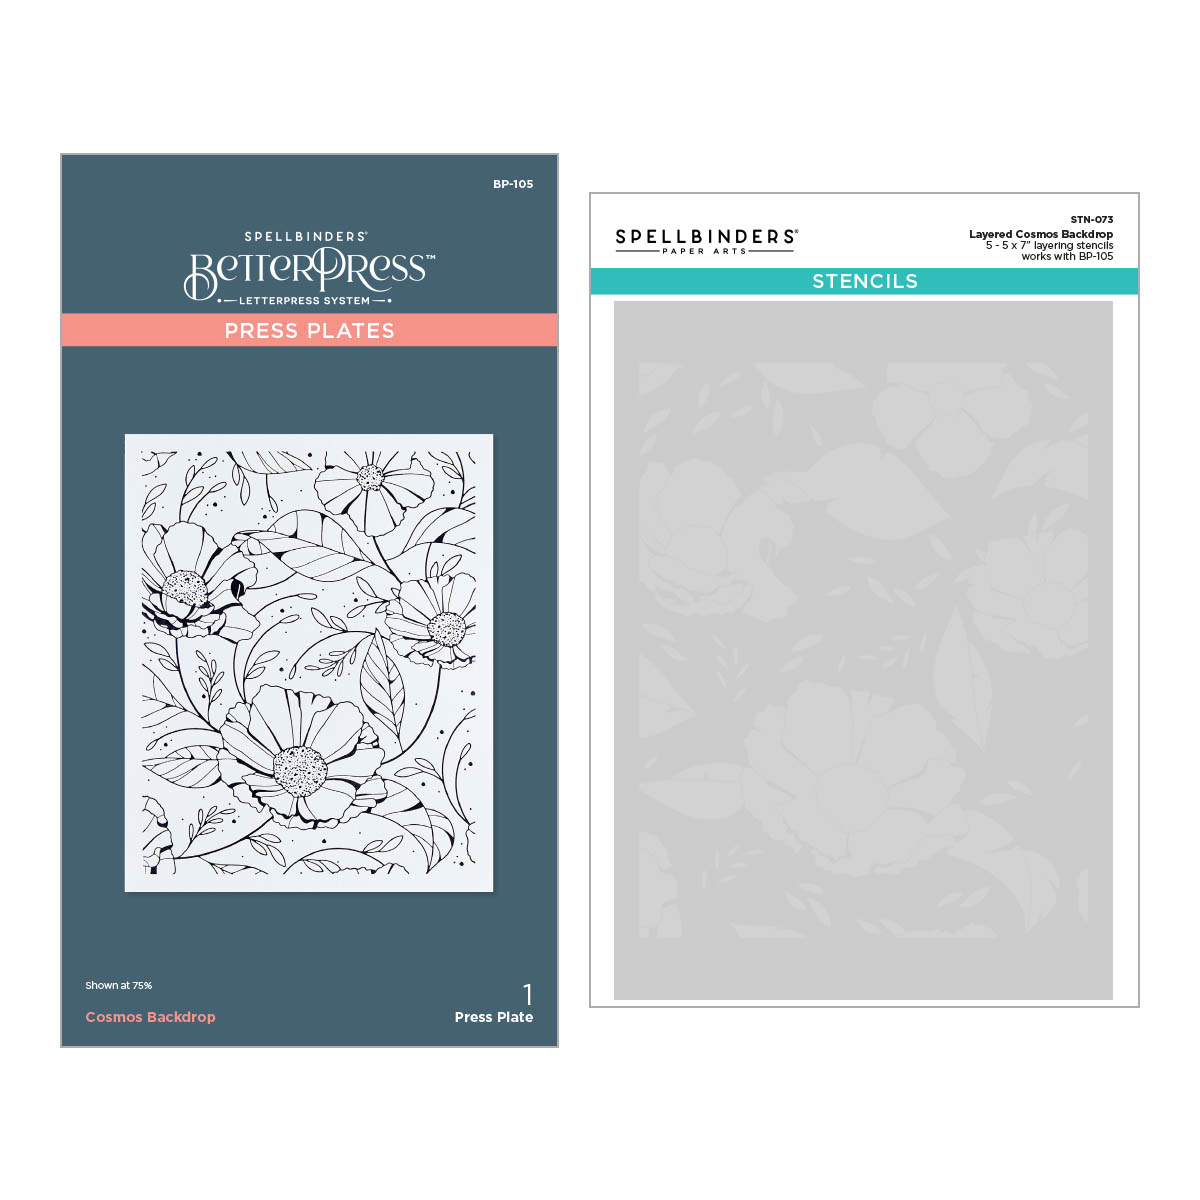 Spellbinders Cosmos Backdrop Betterpress and Stencil Bundle From the Pressed Posies Collection